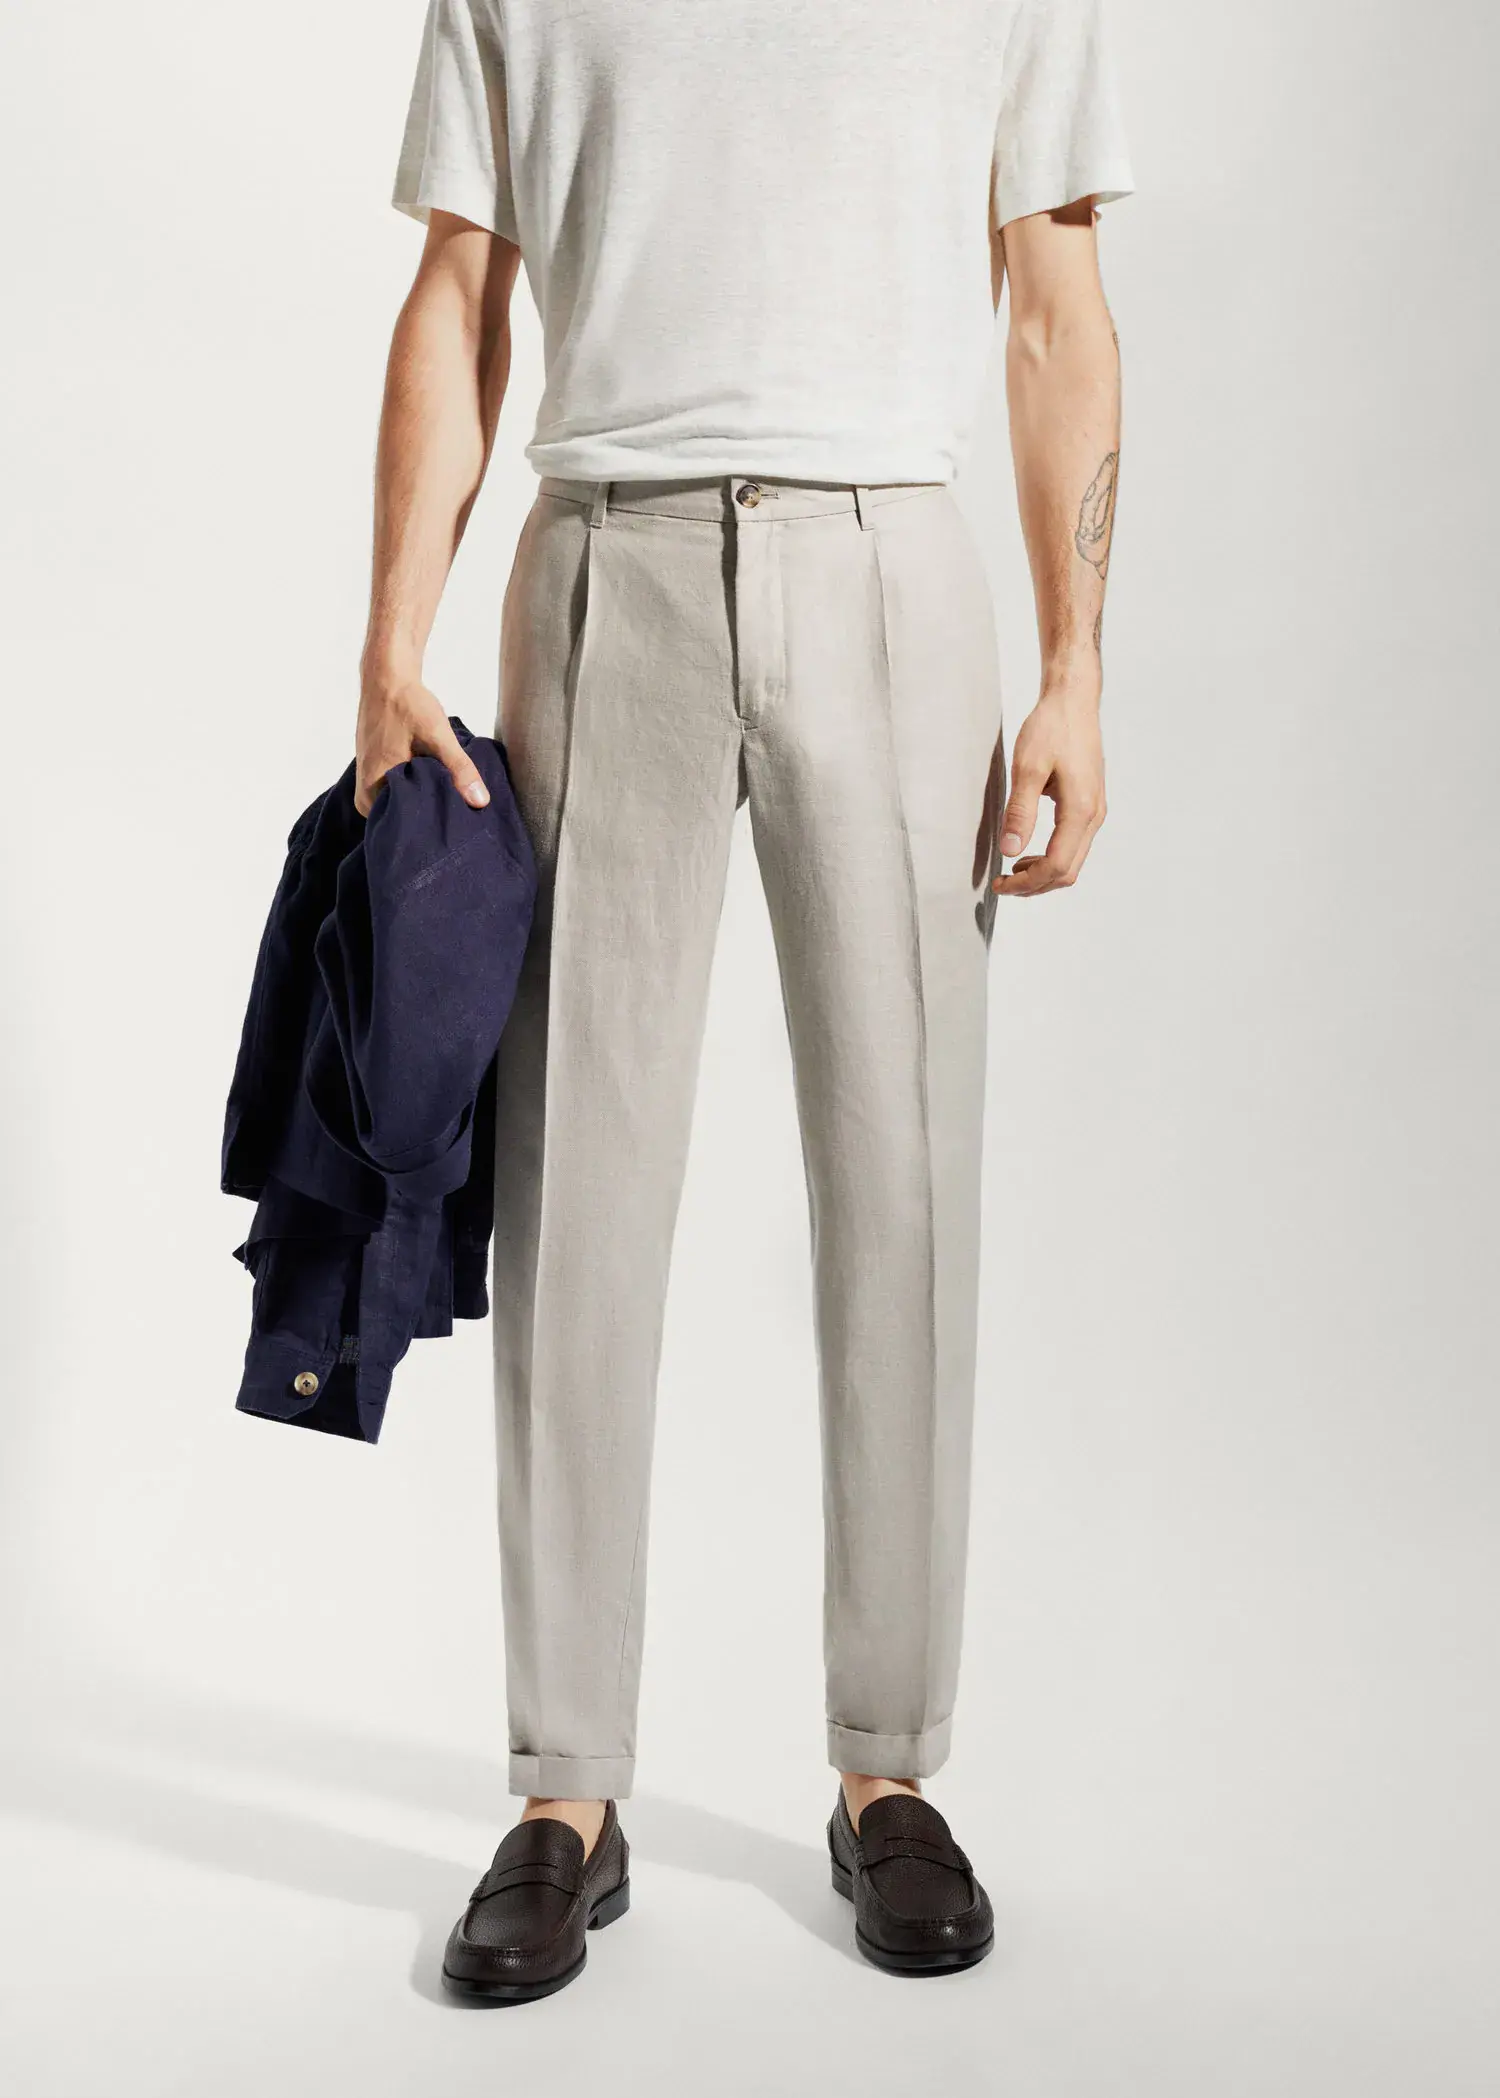 Mango 100% linen regular-fit trousers. a man in a white shirt and a jacket. 